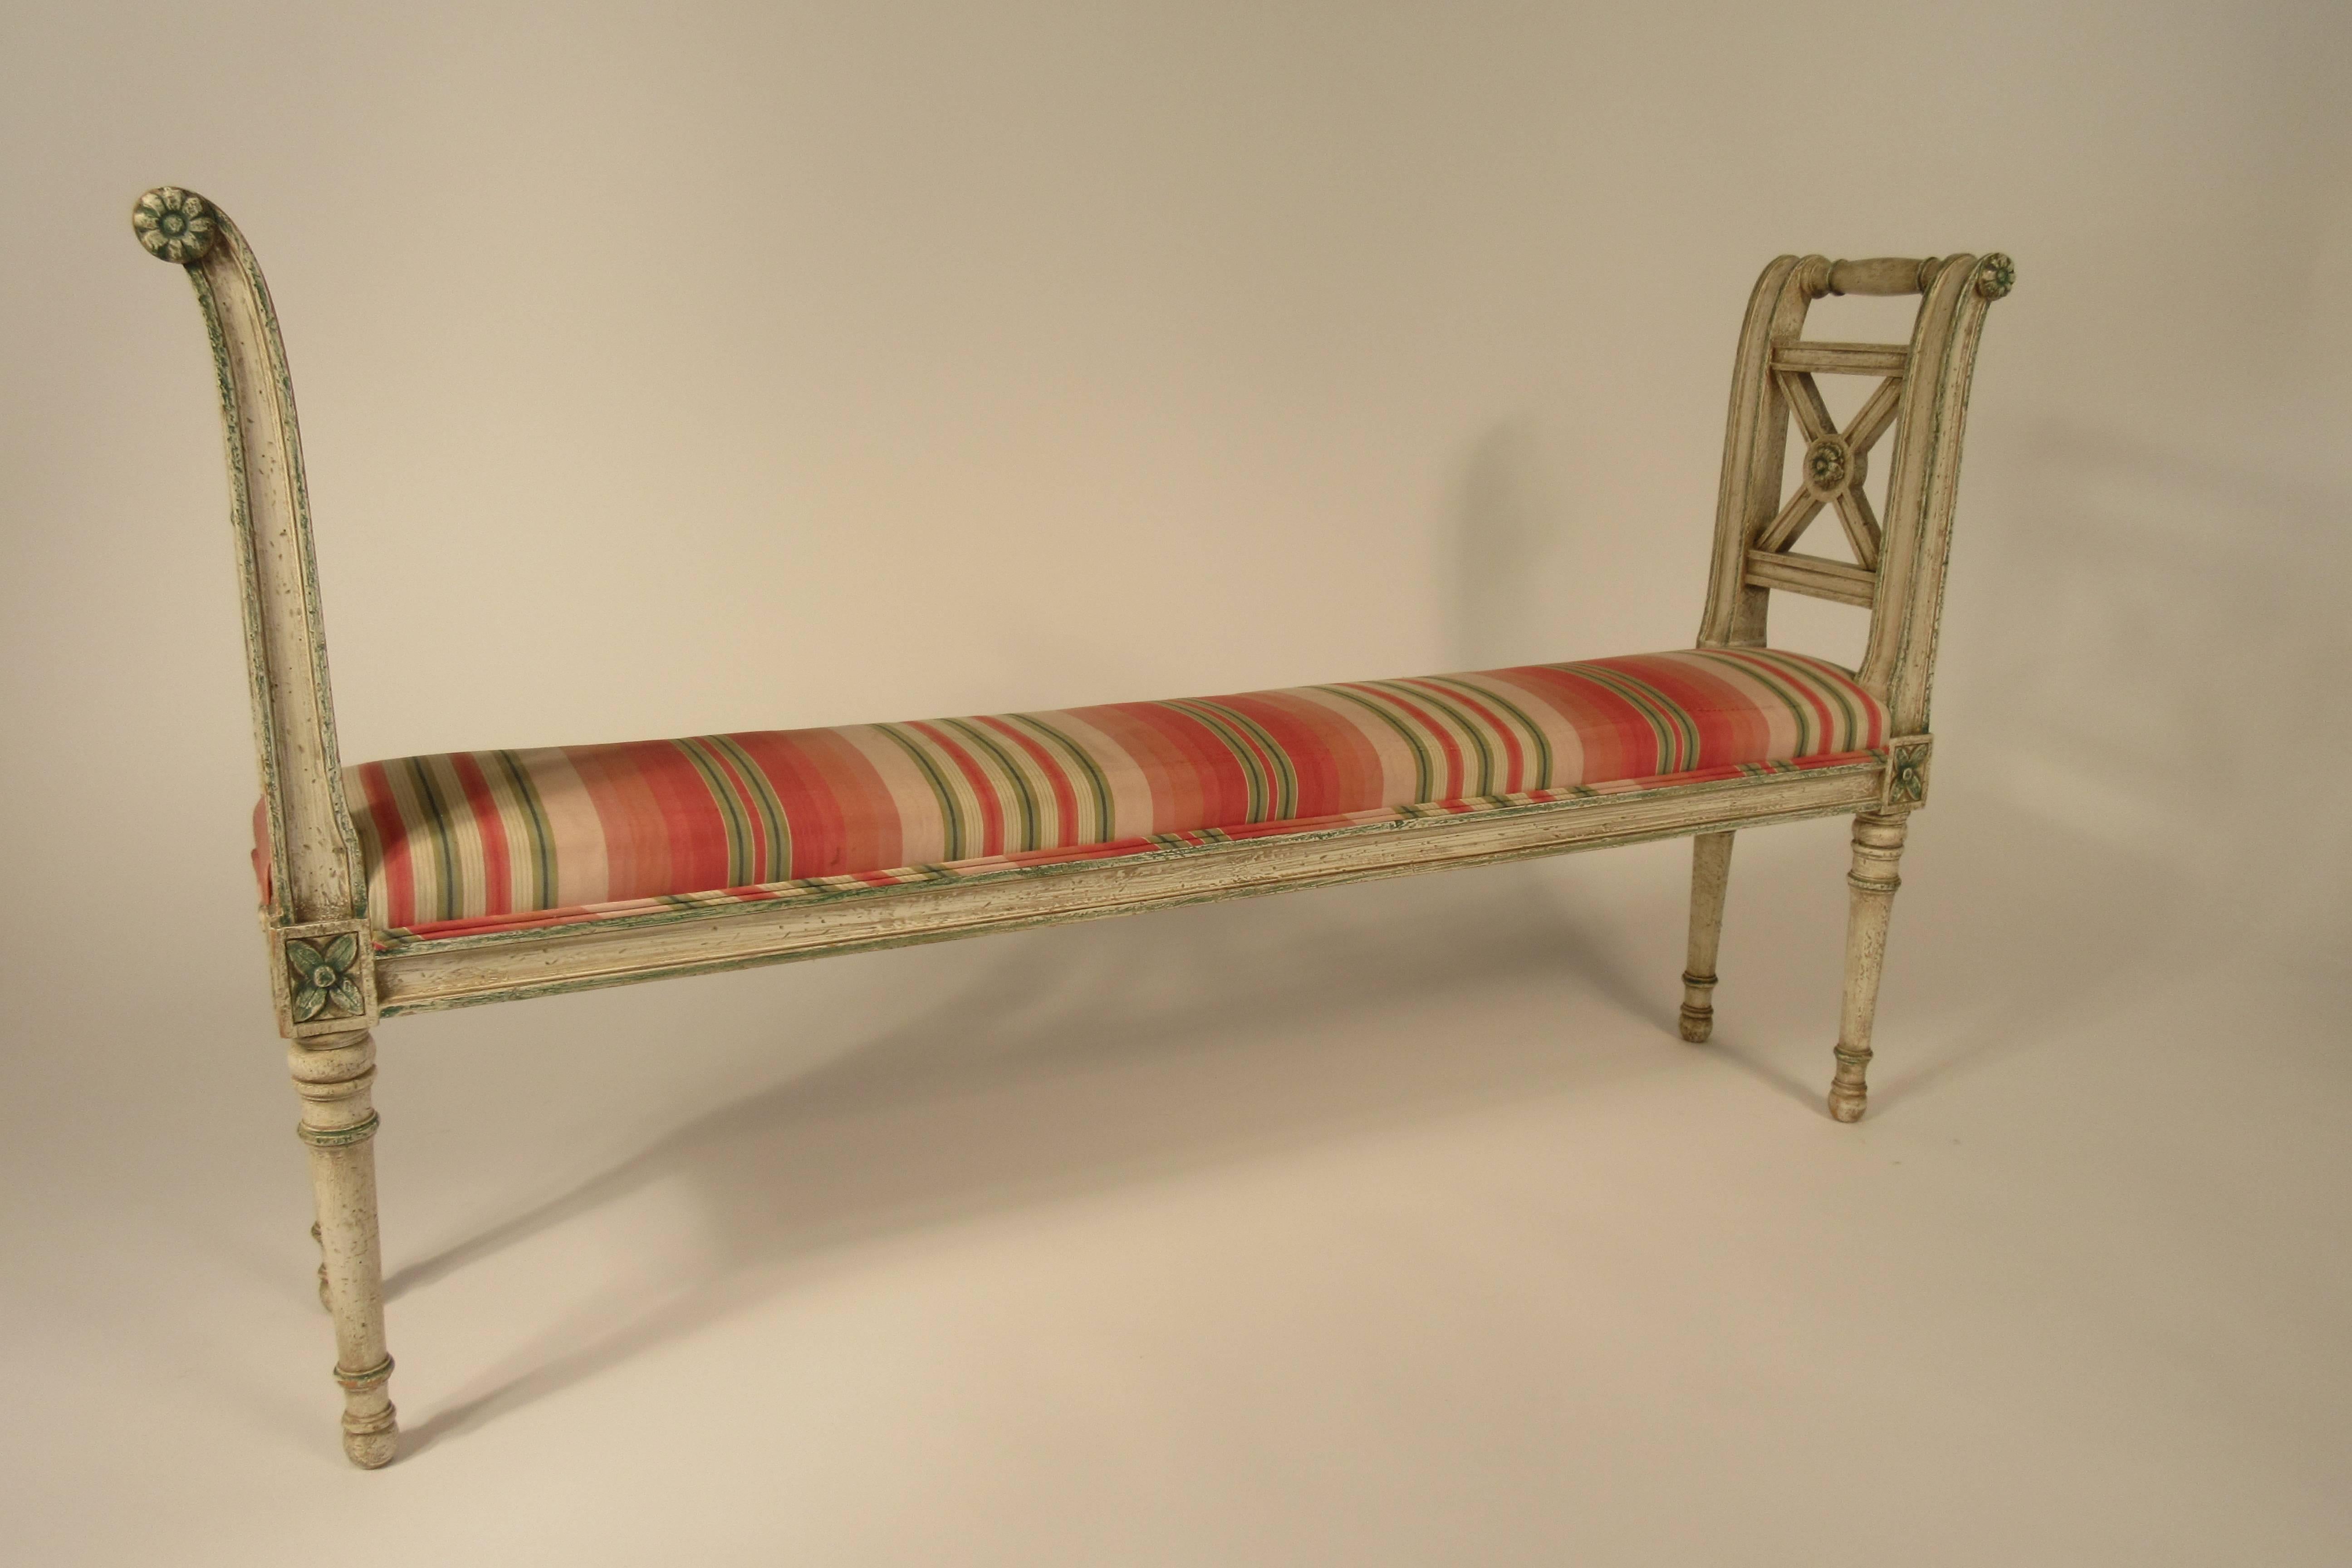 1950s French style narrow bench.